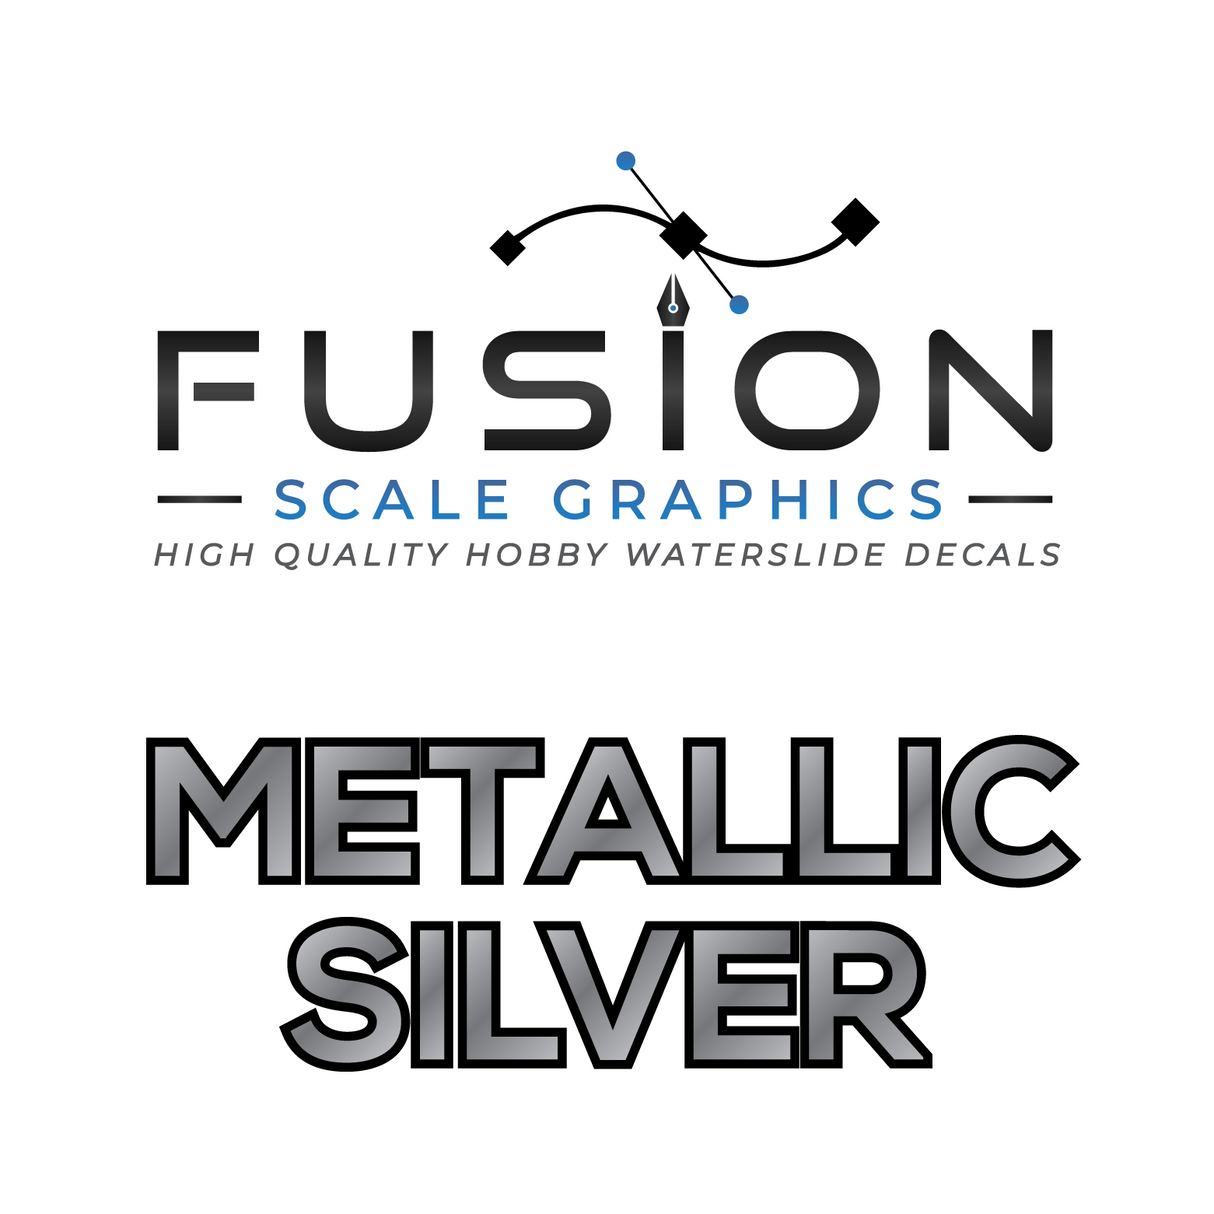 Fusion Scale Graphics Custom Metallic Silver Waterslide Decal Printing Quarter Sheet A6